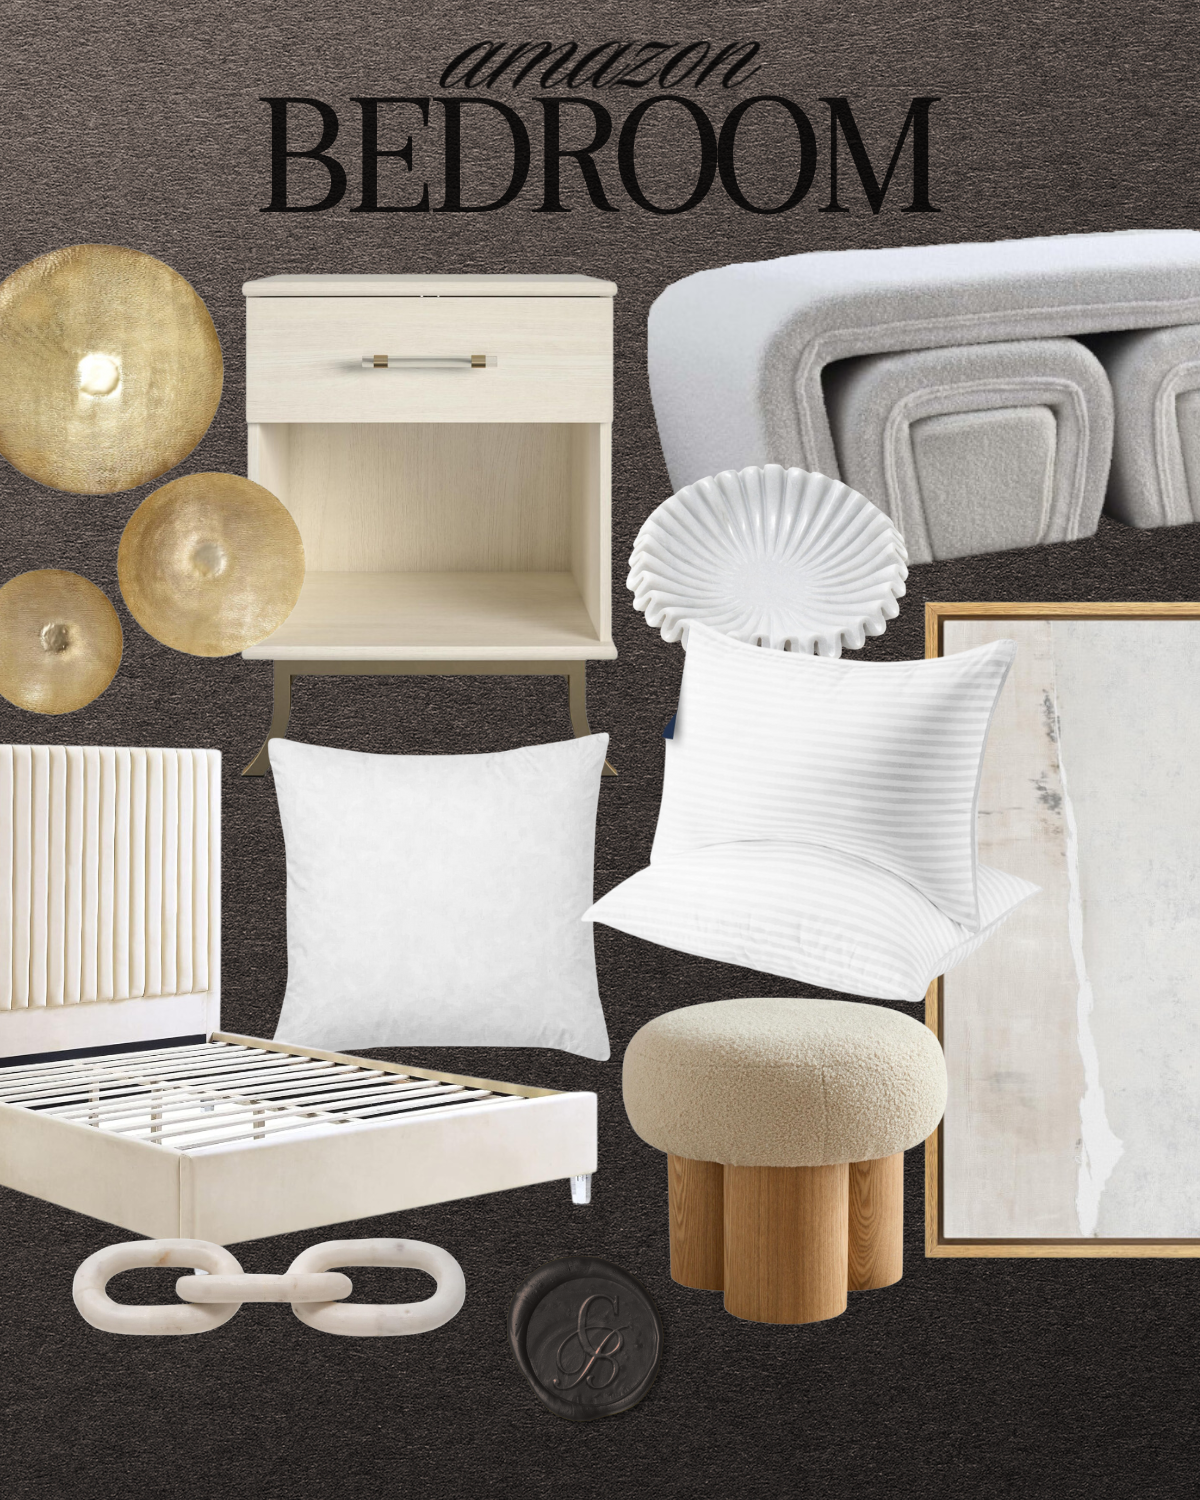 Modern Bedroom Styling home, modern home, home styling, bedroom, bedroom styling, bedroom decor, bedroom essentials